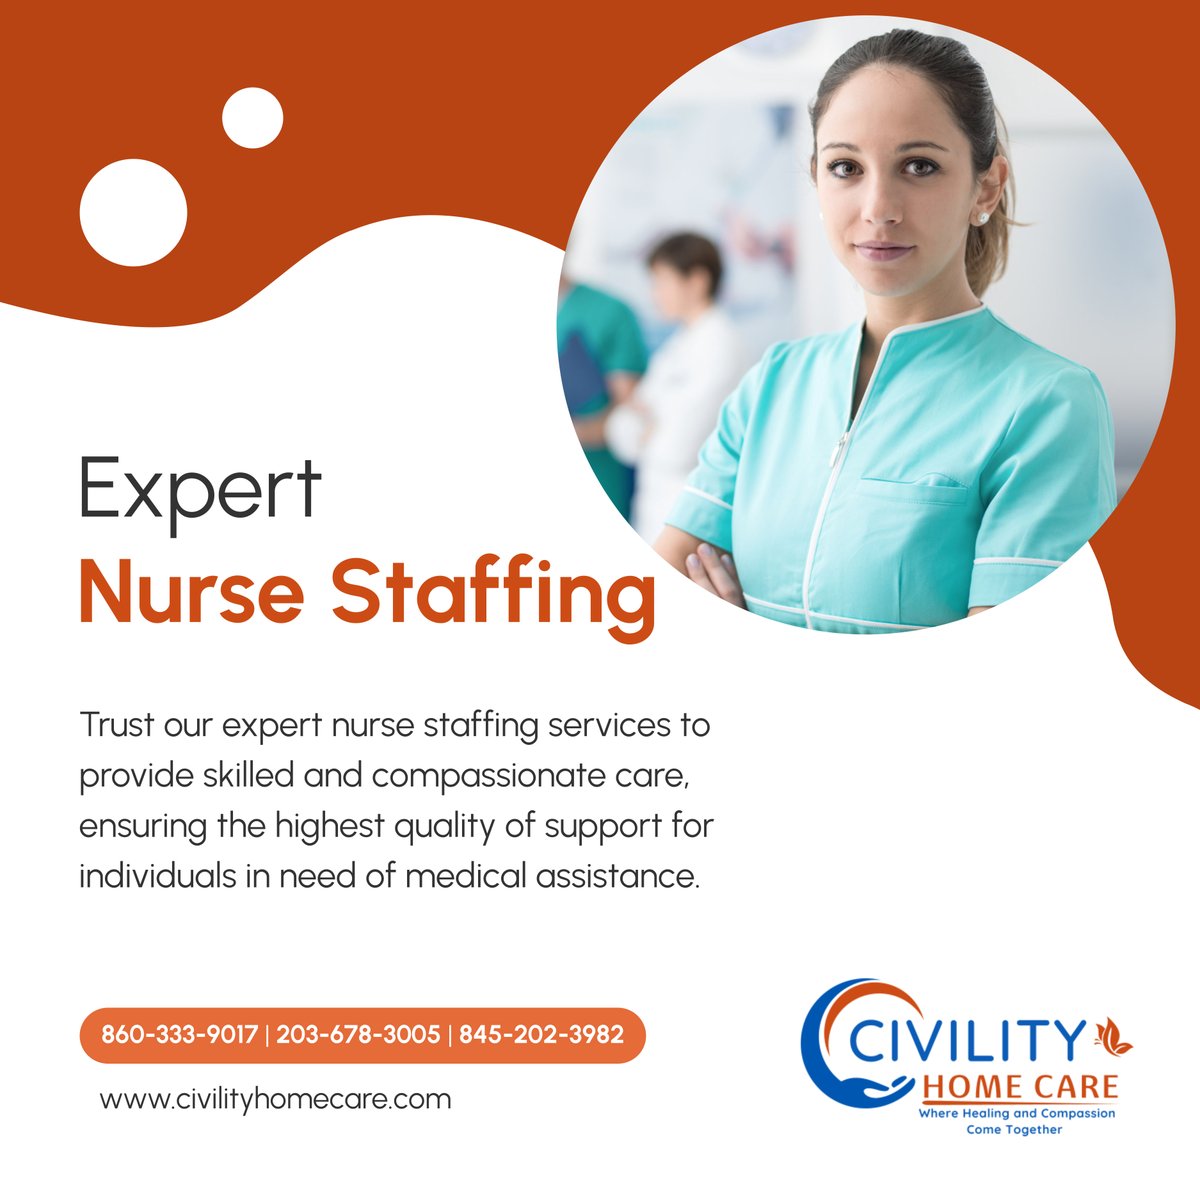 Empower your health journey with our expert nurse staffing services, delivering compassionate care tailored to your unique needs. 

#BrewsterNY #HomeCareAndMedicalSupplies #NurseStaffing #SkilledNurses #ExpertCare